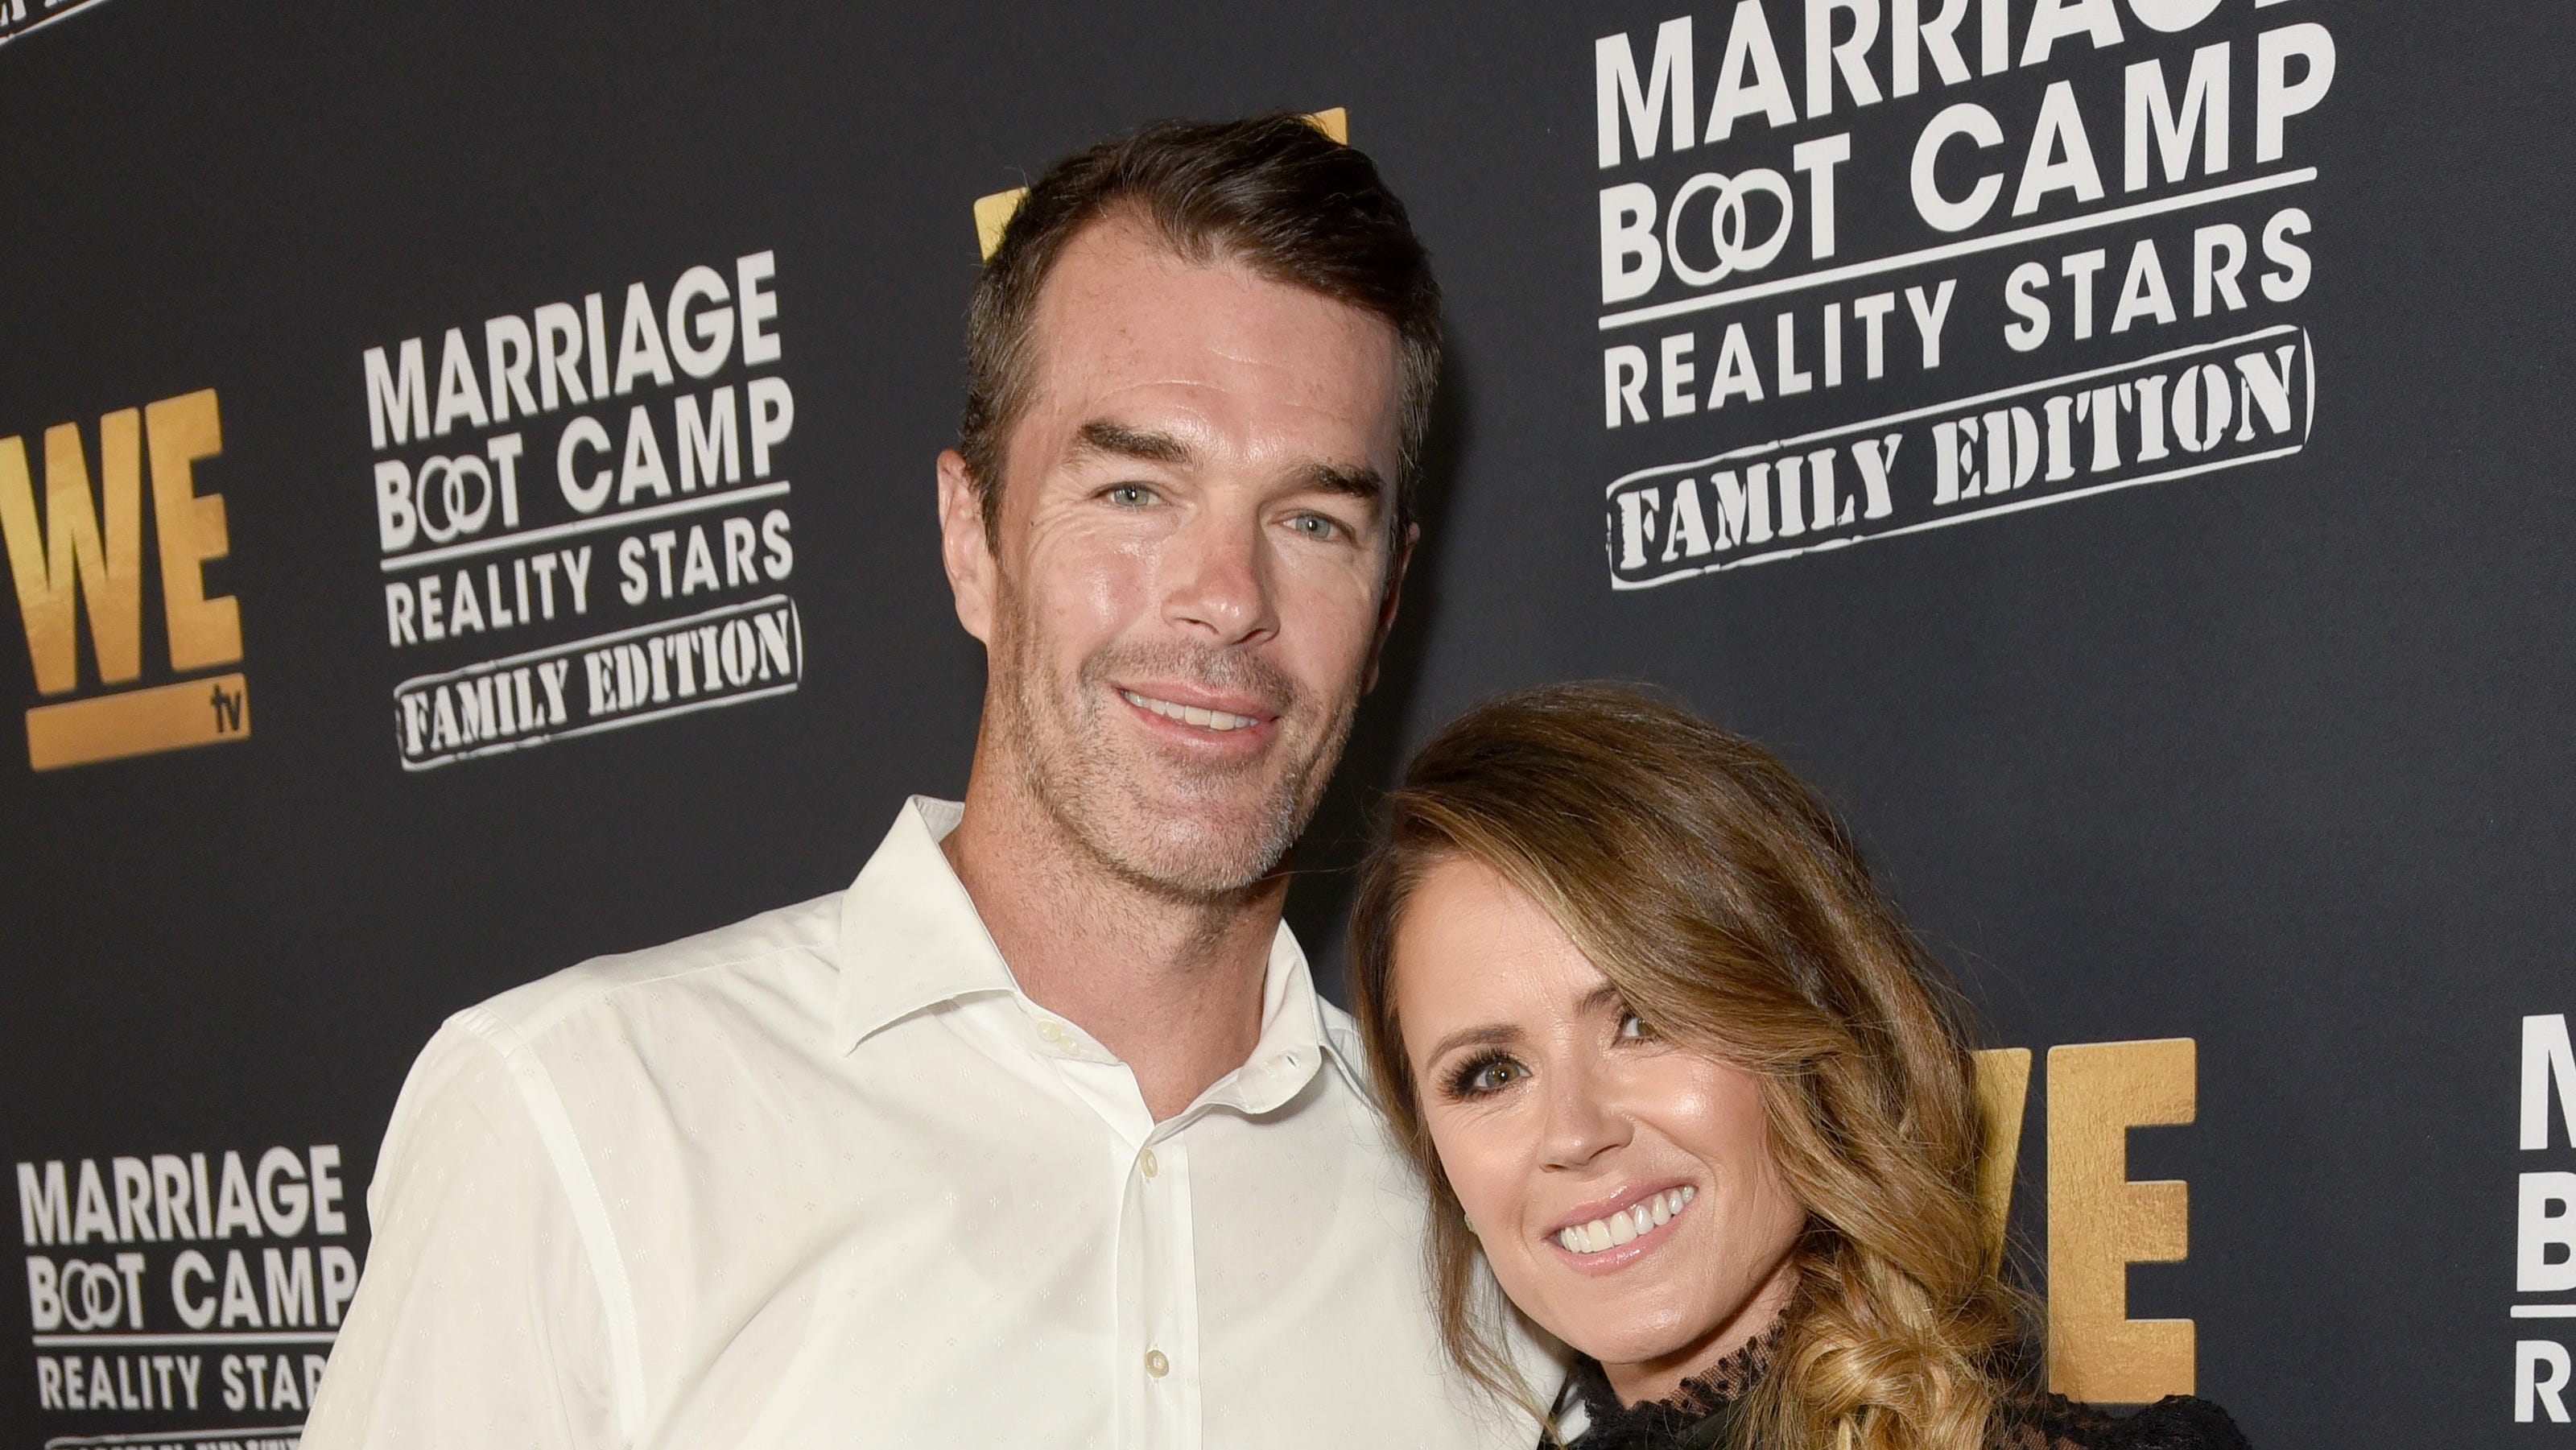 'Bachelorette' star Ryan Sutter says he and wife Trista are 'fine' amid mysterious posts